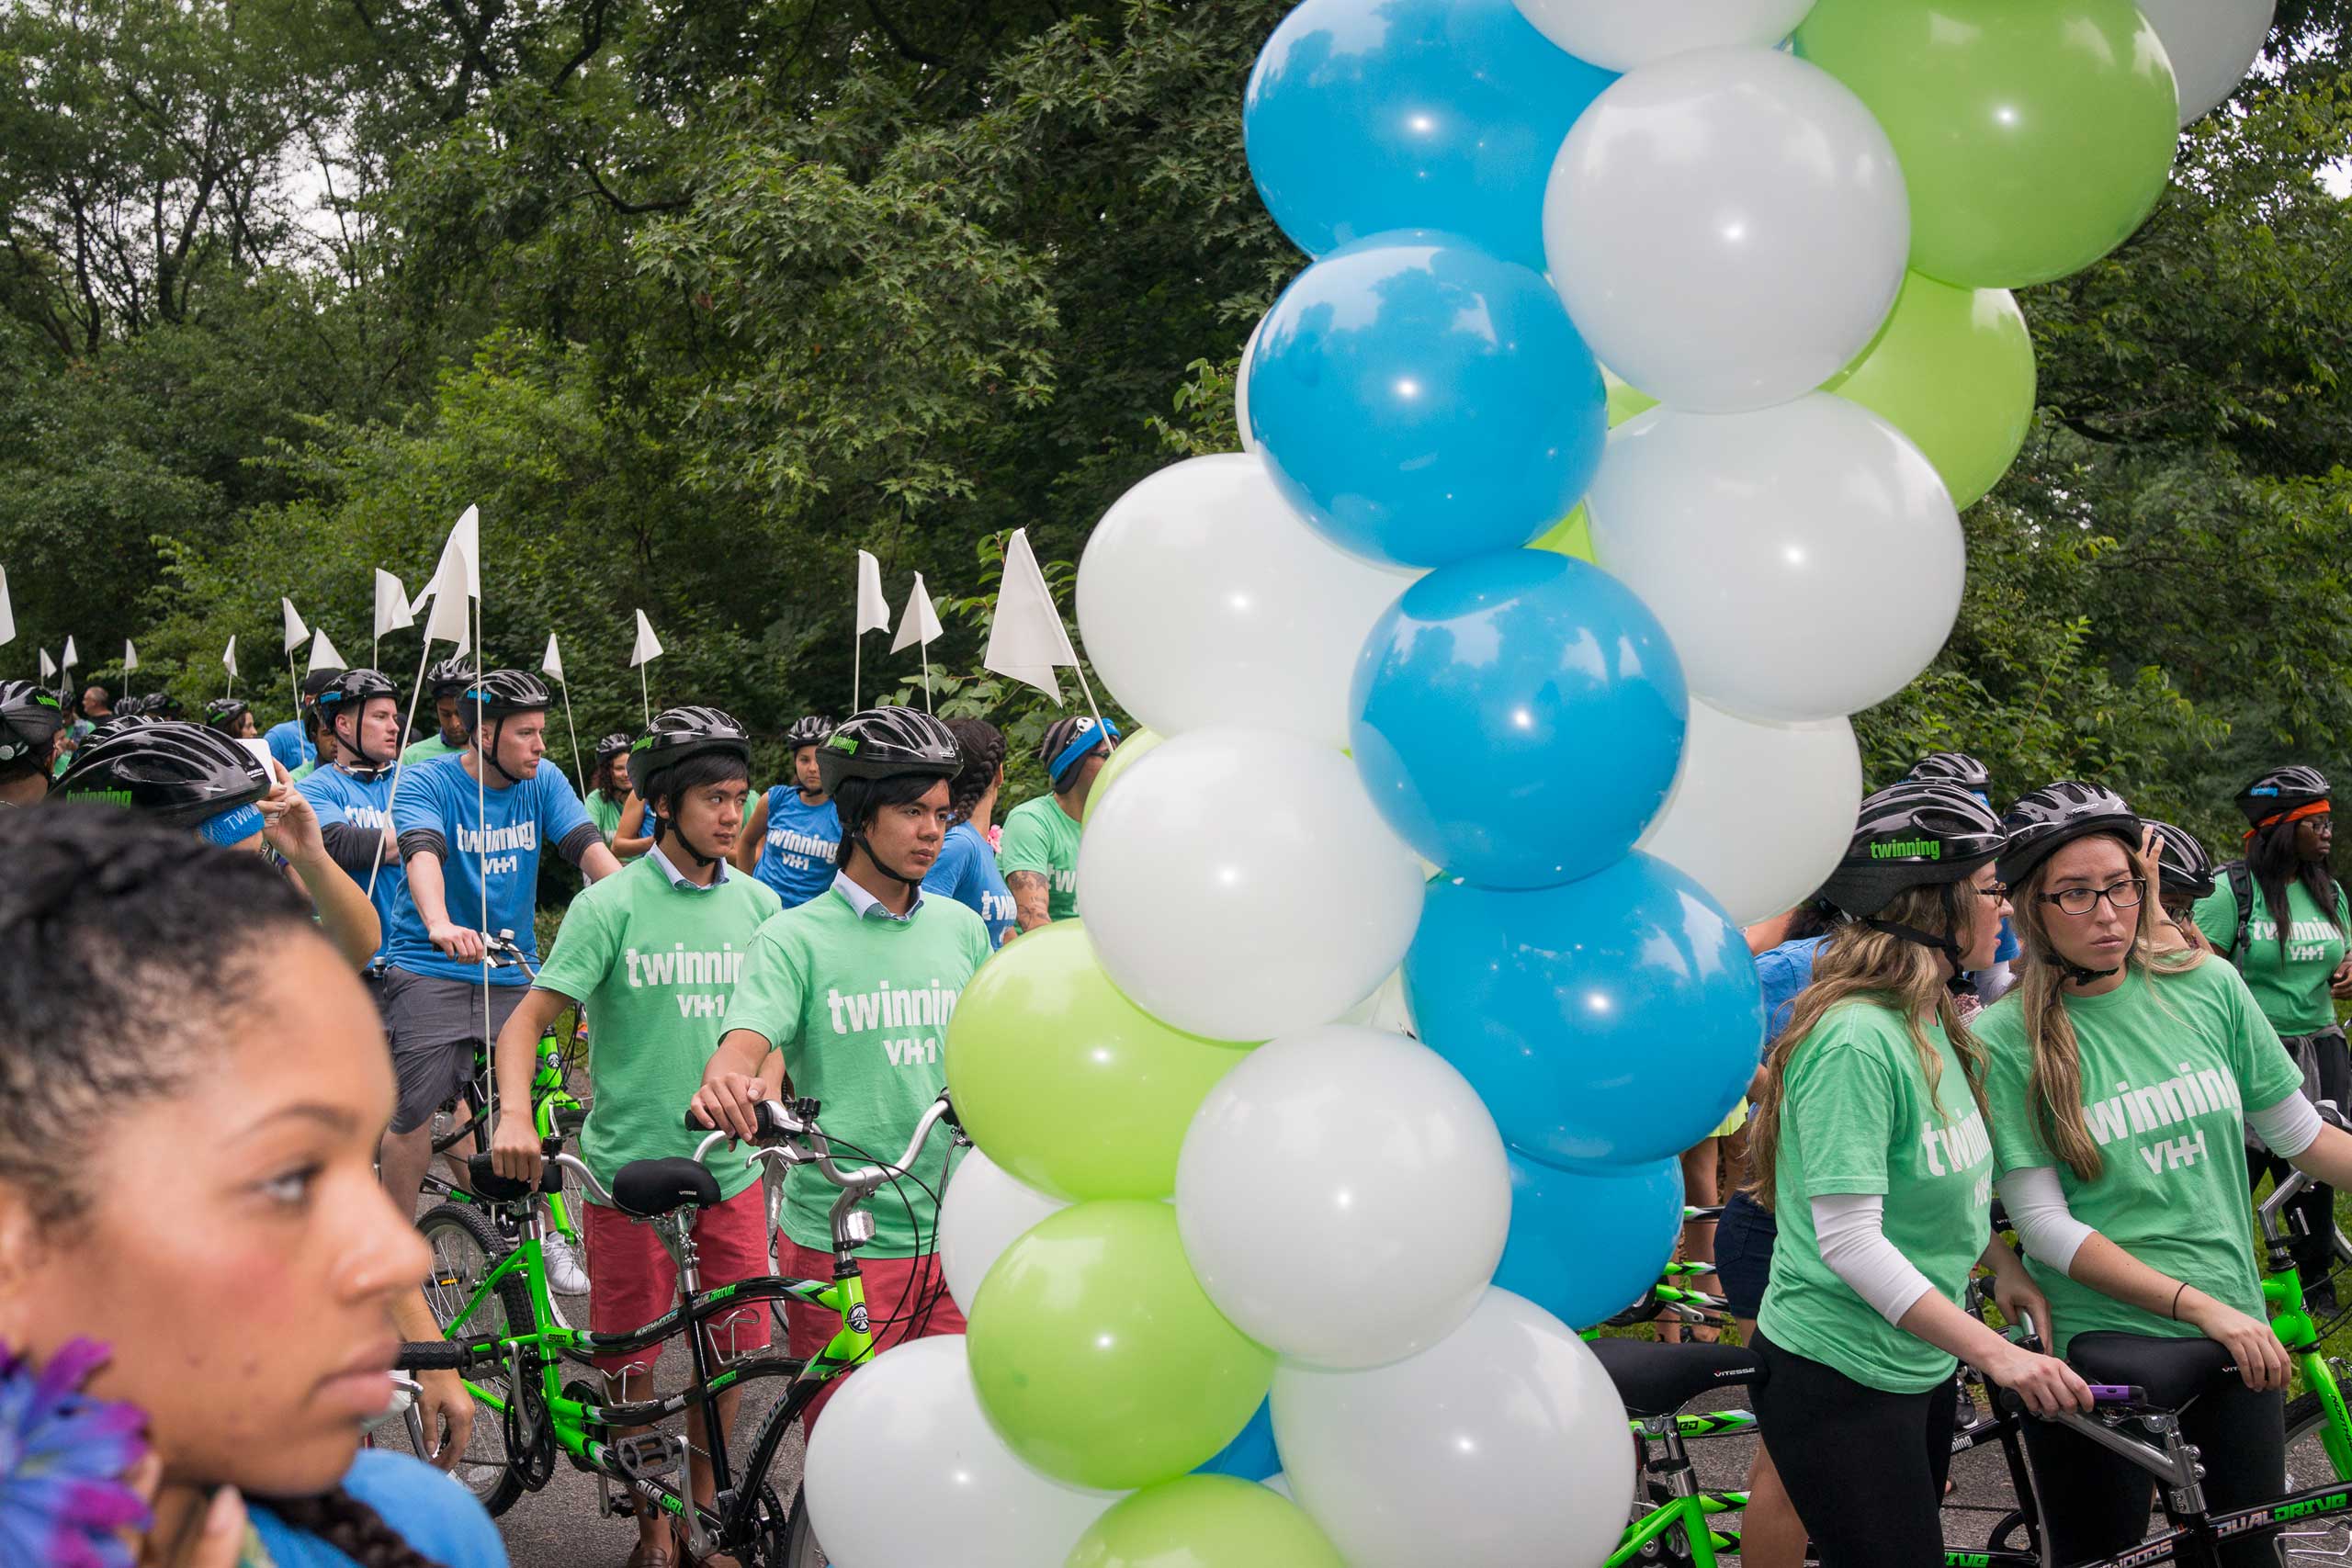 Twins gather before riding tandem bikes in an attempt to set the record for the most twins ever riding tandem bikes, in Central Park in New York City on July 15, 2015.